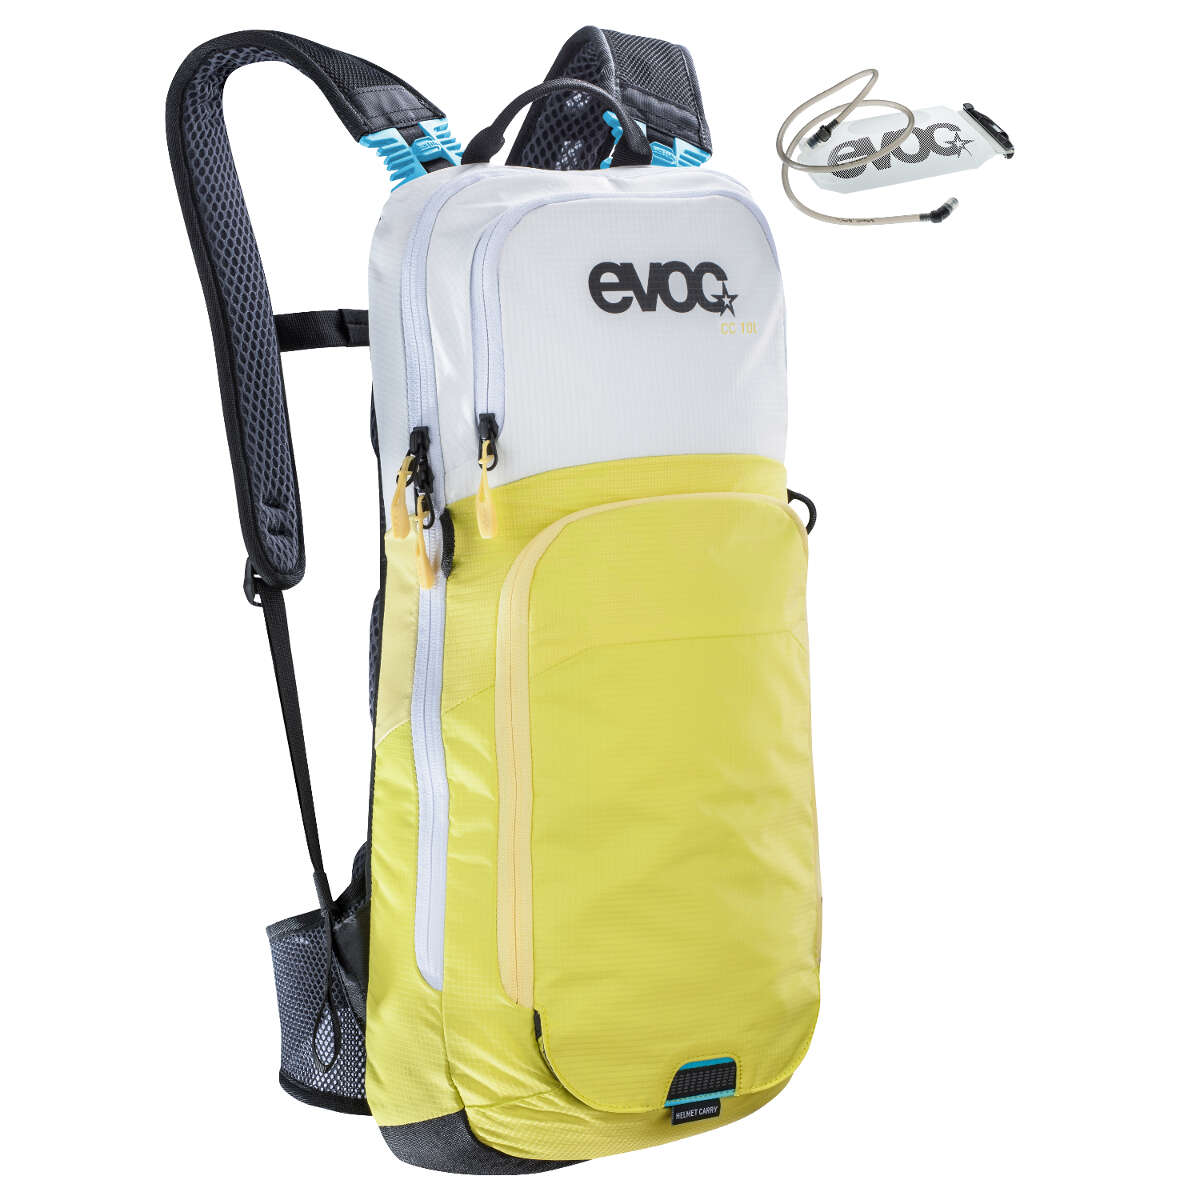 Evoc Backpack with Hydration System Cross Country White/Sulphur, 10 Liter